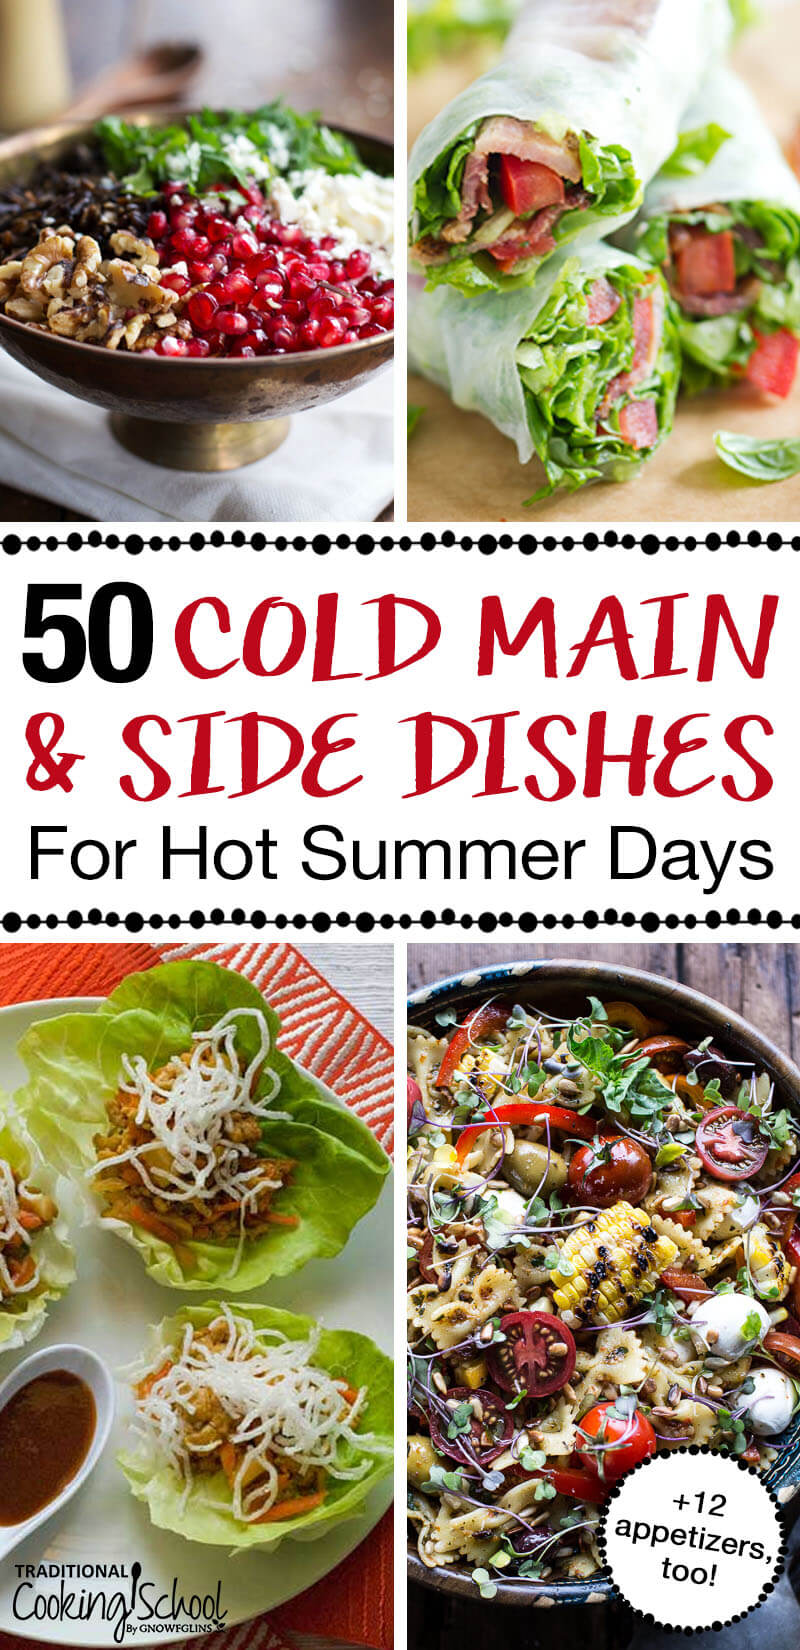 Four summer recipe images to include lettuce cups, lettuce wraps, and a cold cobb salad with text overlay '50 Cold Main & Side Dishes For Hot Summer Days'.